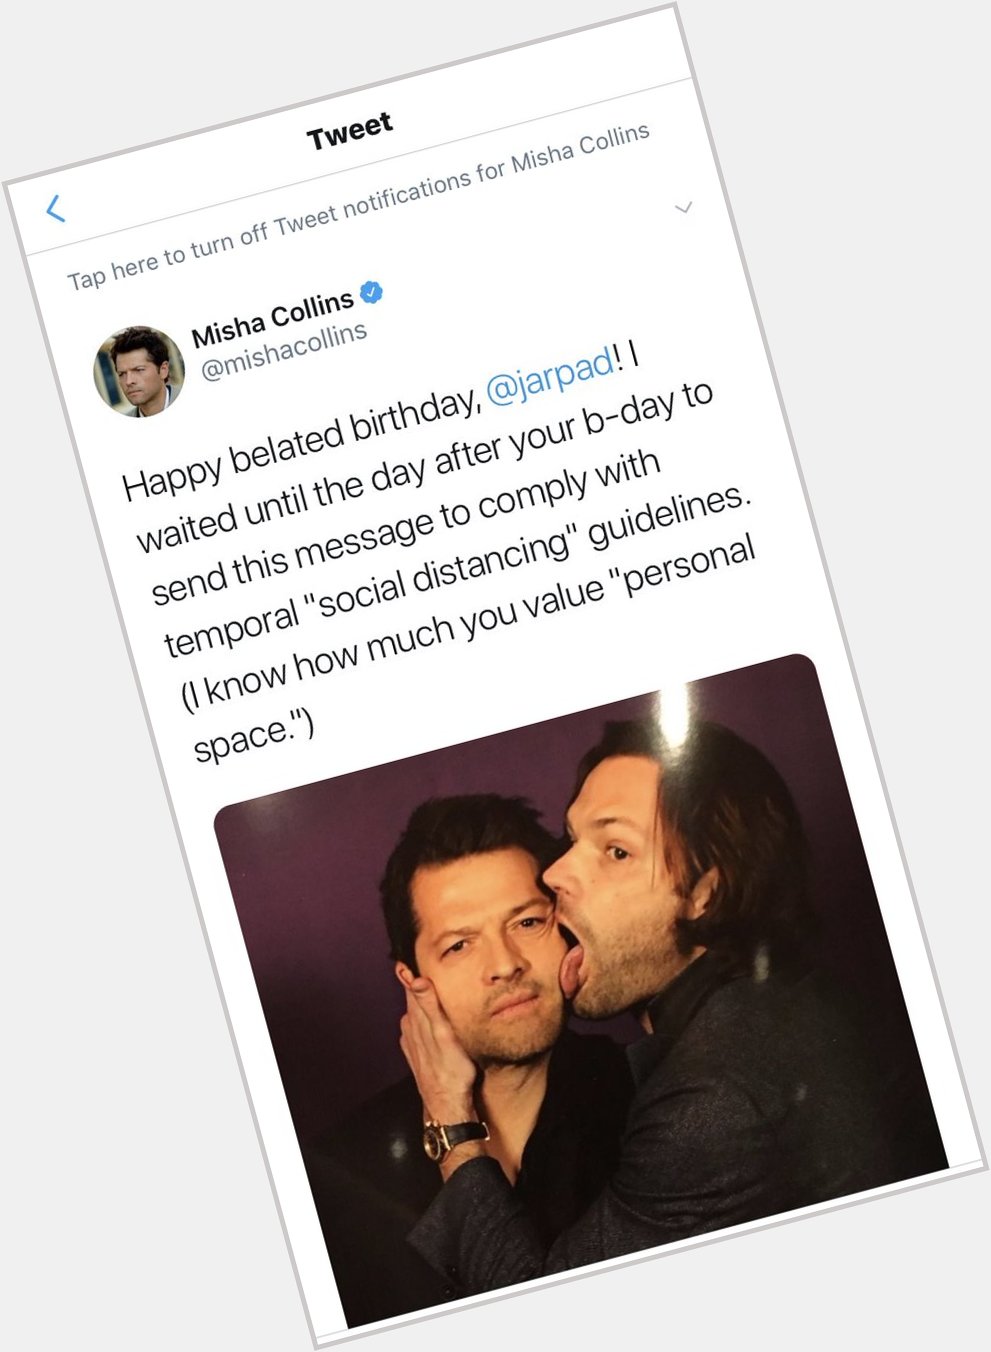 Misha fixed his message today. Also Happy birthday to Jared padalecki!   